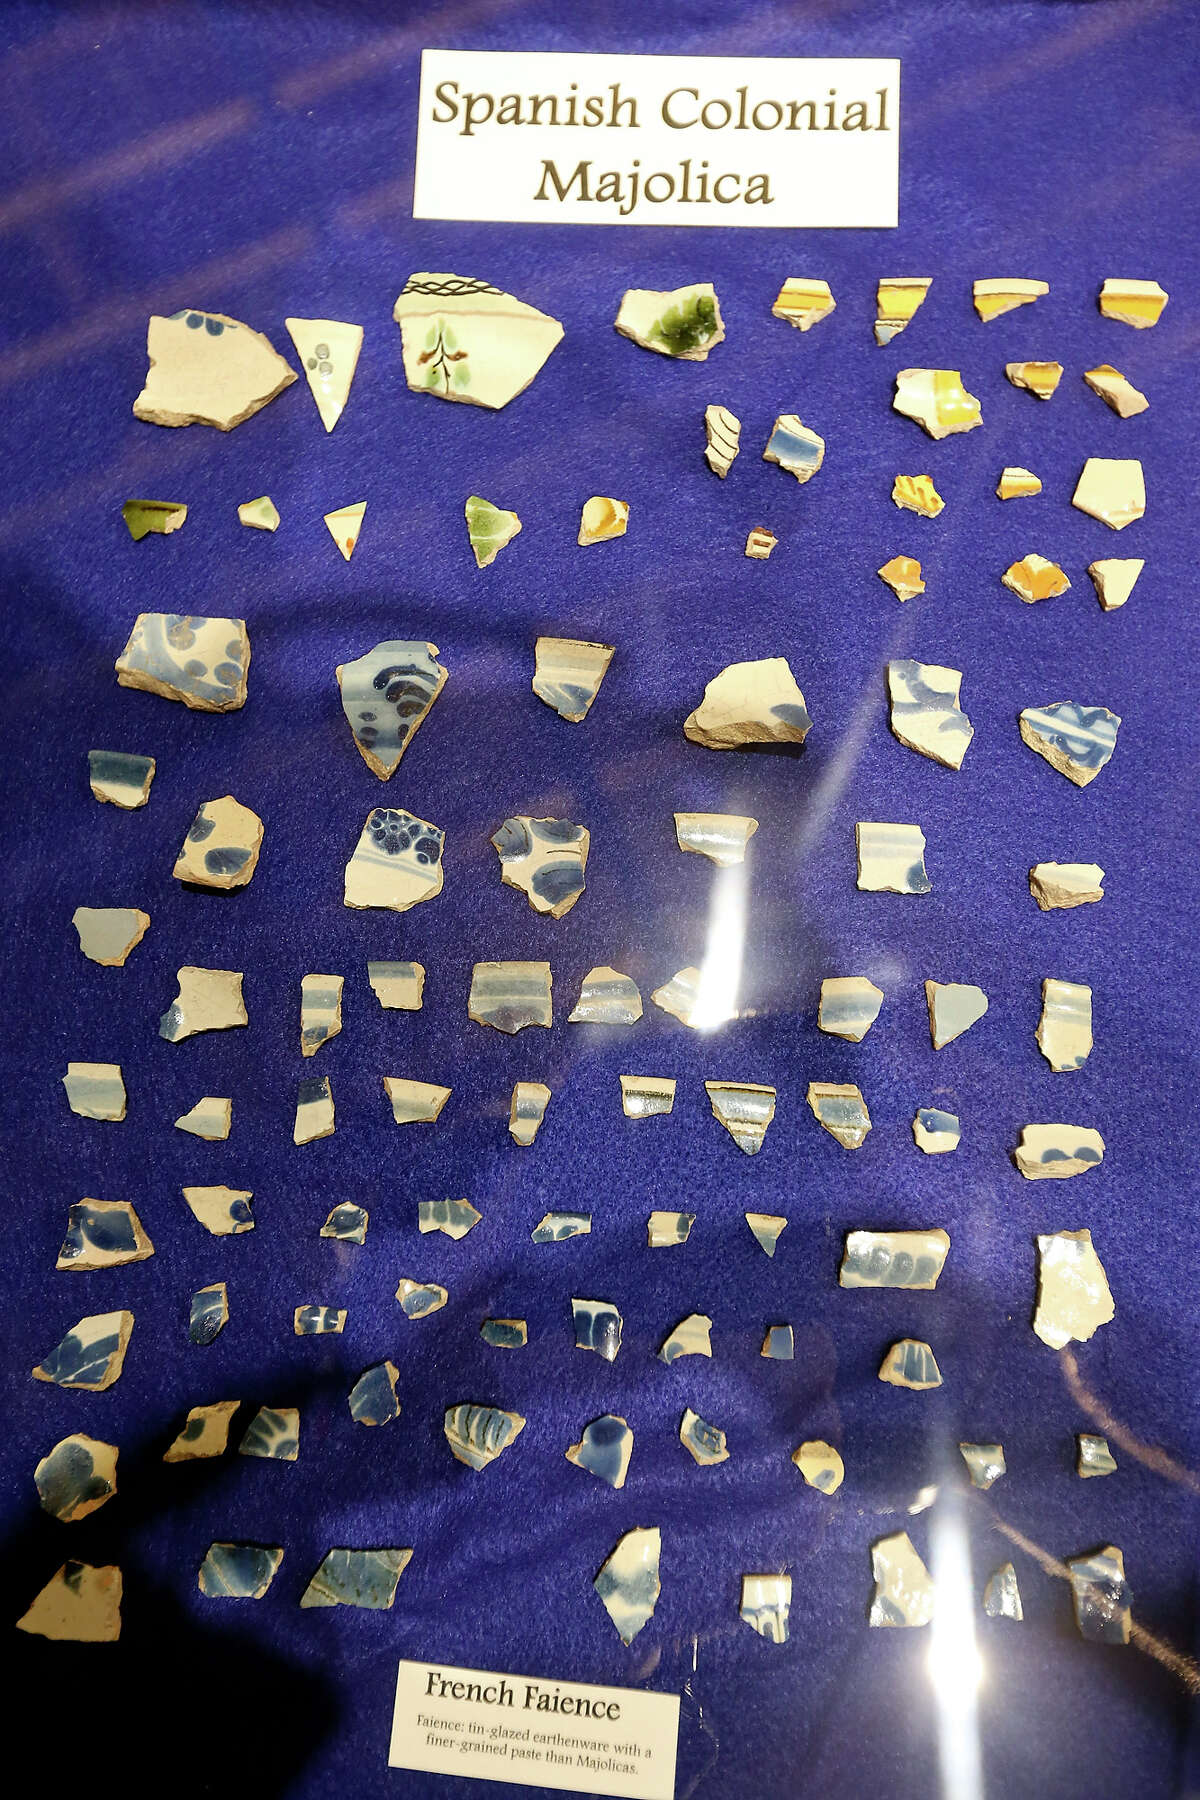 Detail of artifacts from the Presidio San Antonio de Bexar (1722) after a press conference held Friday Oct. 2, 2015 in the Culture Commons Storefront Gallery & Exhibit Hall at the Plaza de Armas Building.